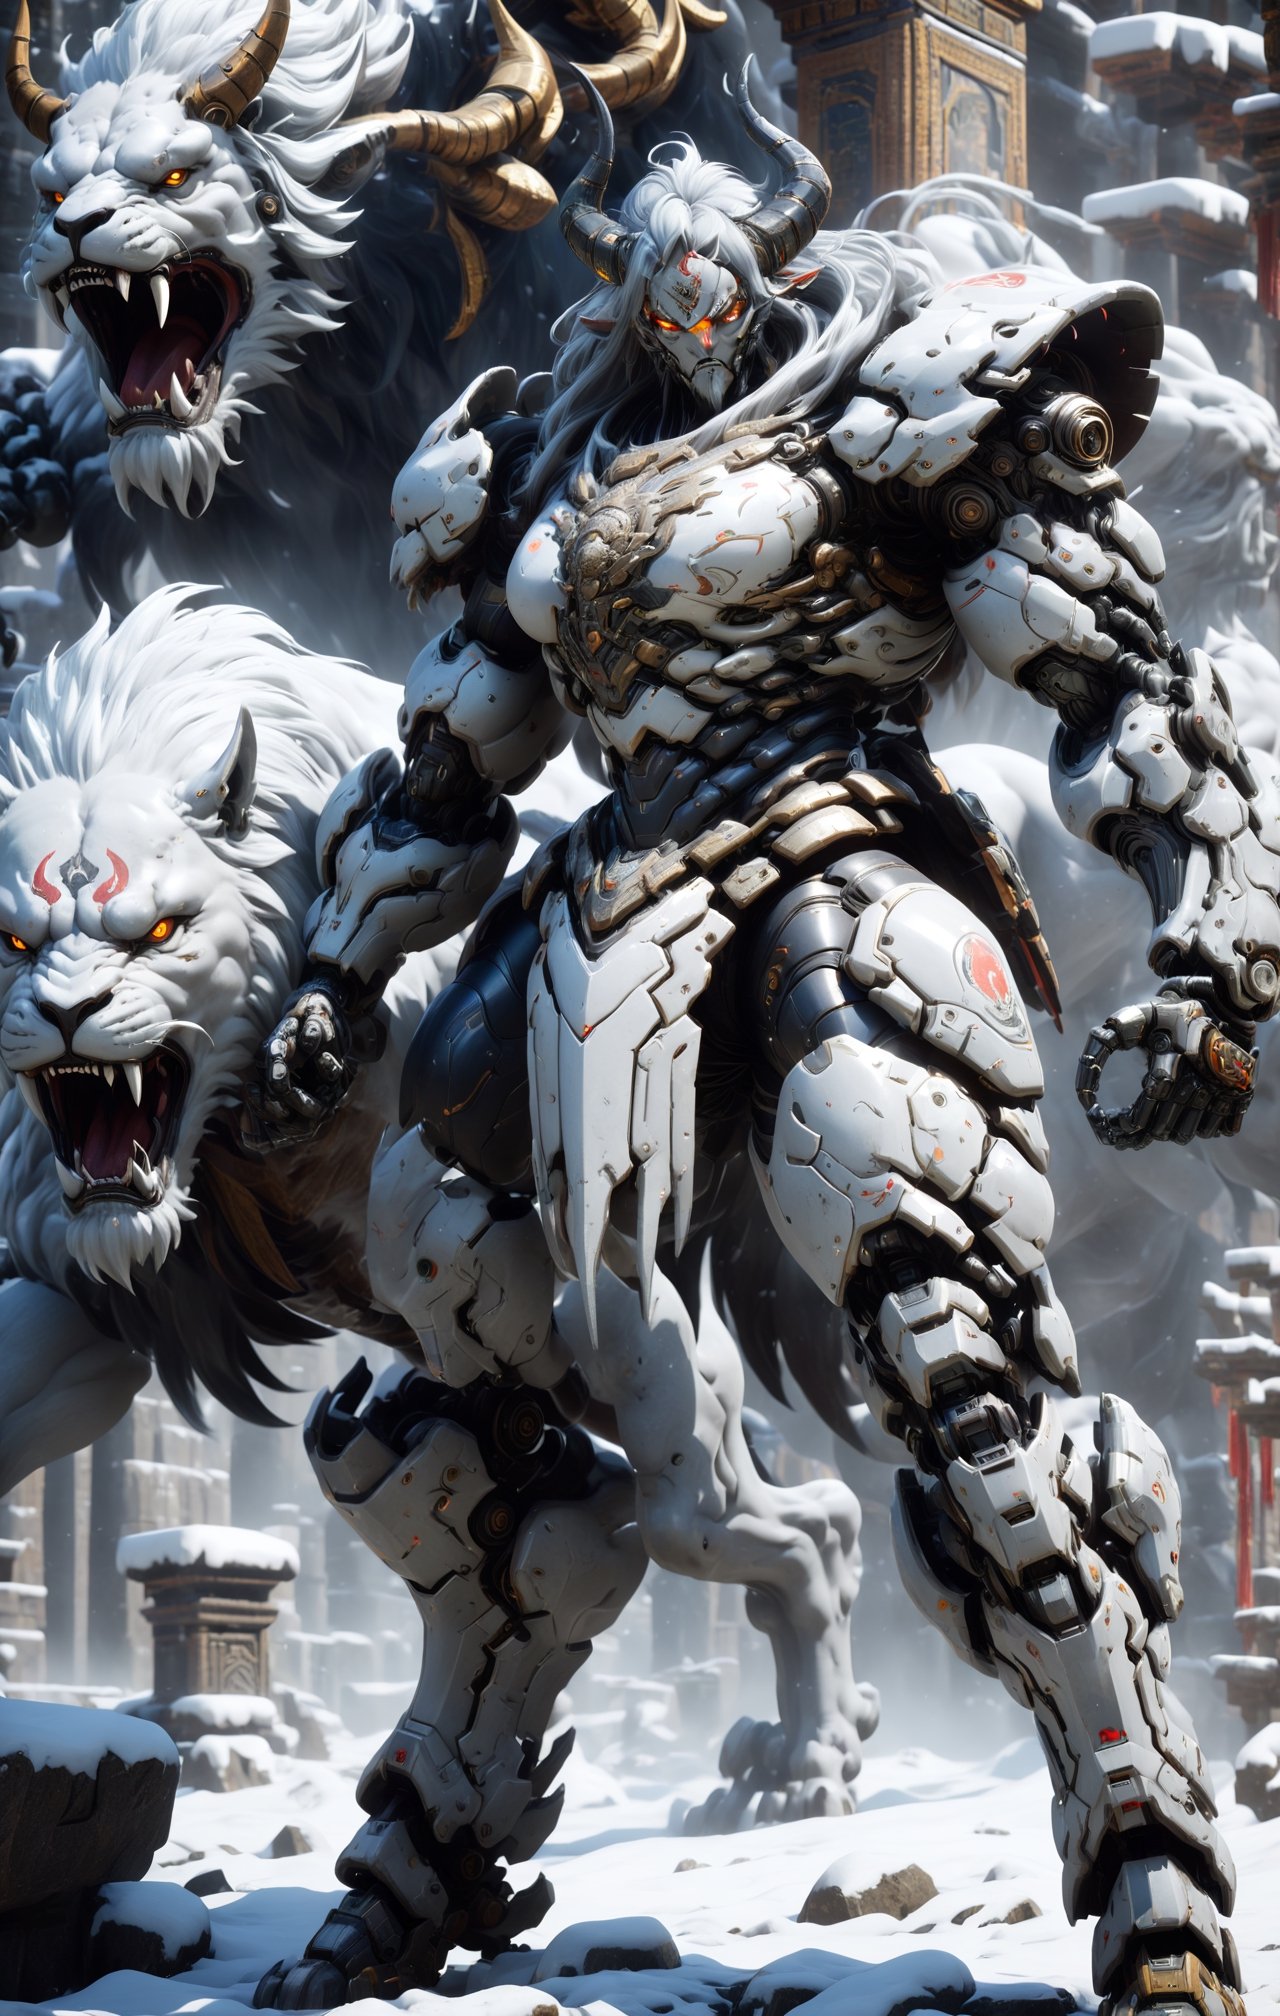 terrifying ultimate Beast centaur with lion half body, cyborg complex armor, fighting pose in middle snowy temple, misty snowstorm, Hyper Detailed, Cinematic Lighting Photography, nvidia rtx, super-resolution, unreal 5, subsurface scattering, pbr texturing, 32k UHD